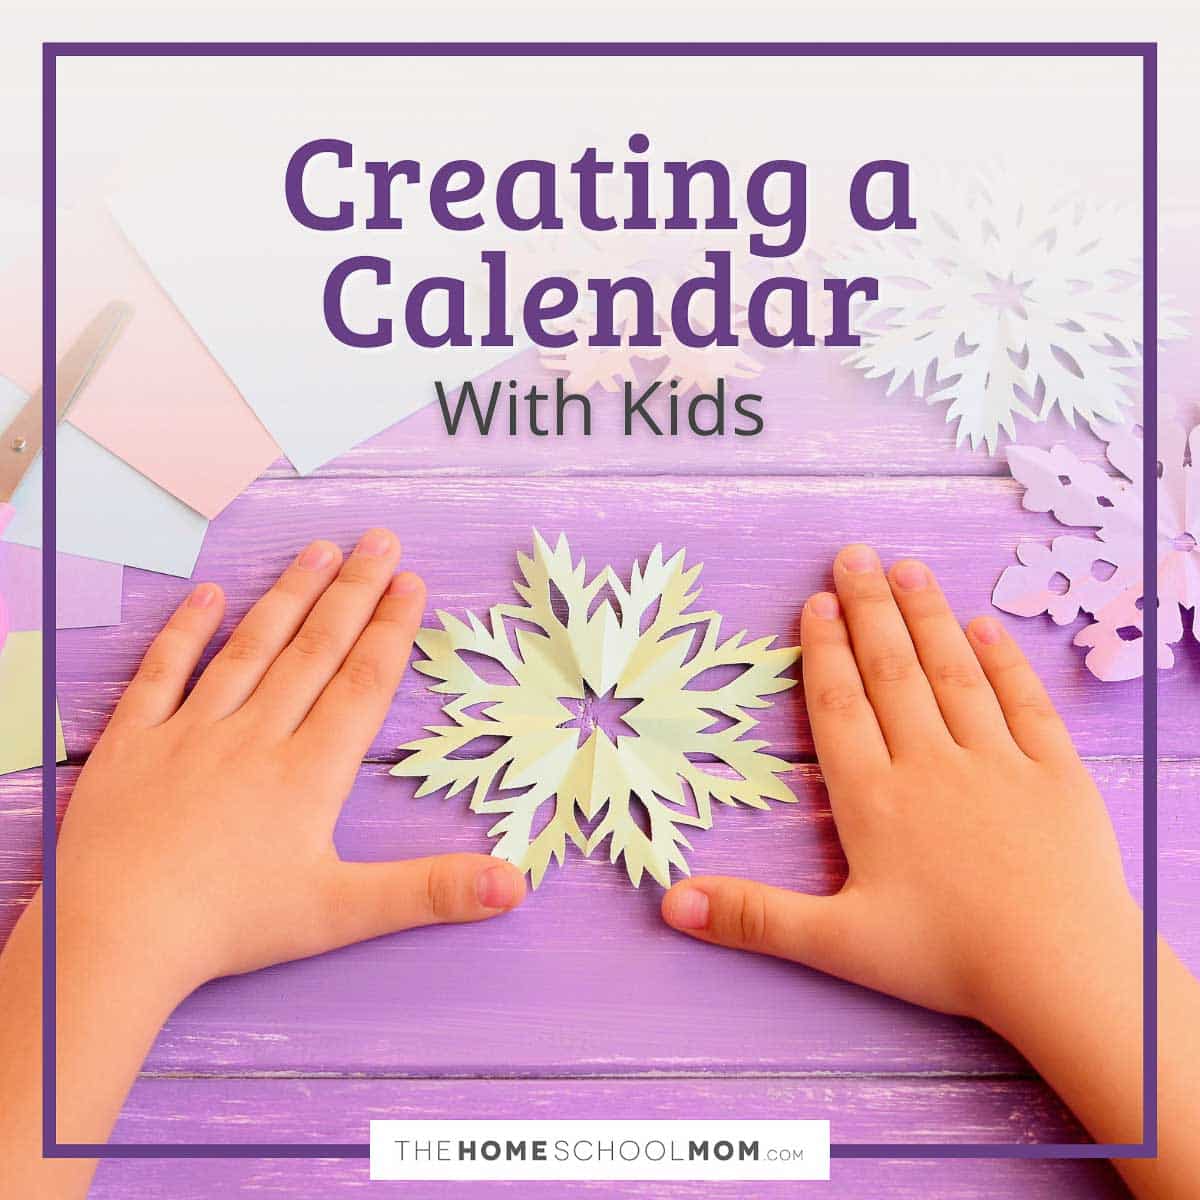 Creating a calendar with kids.